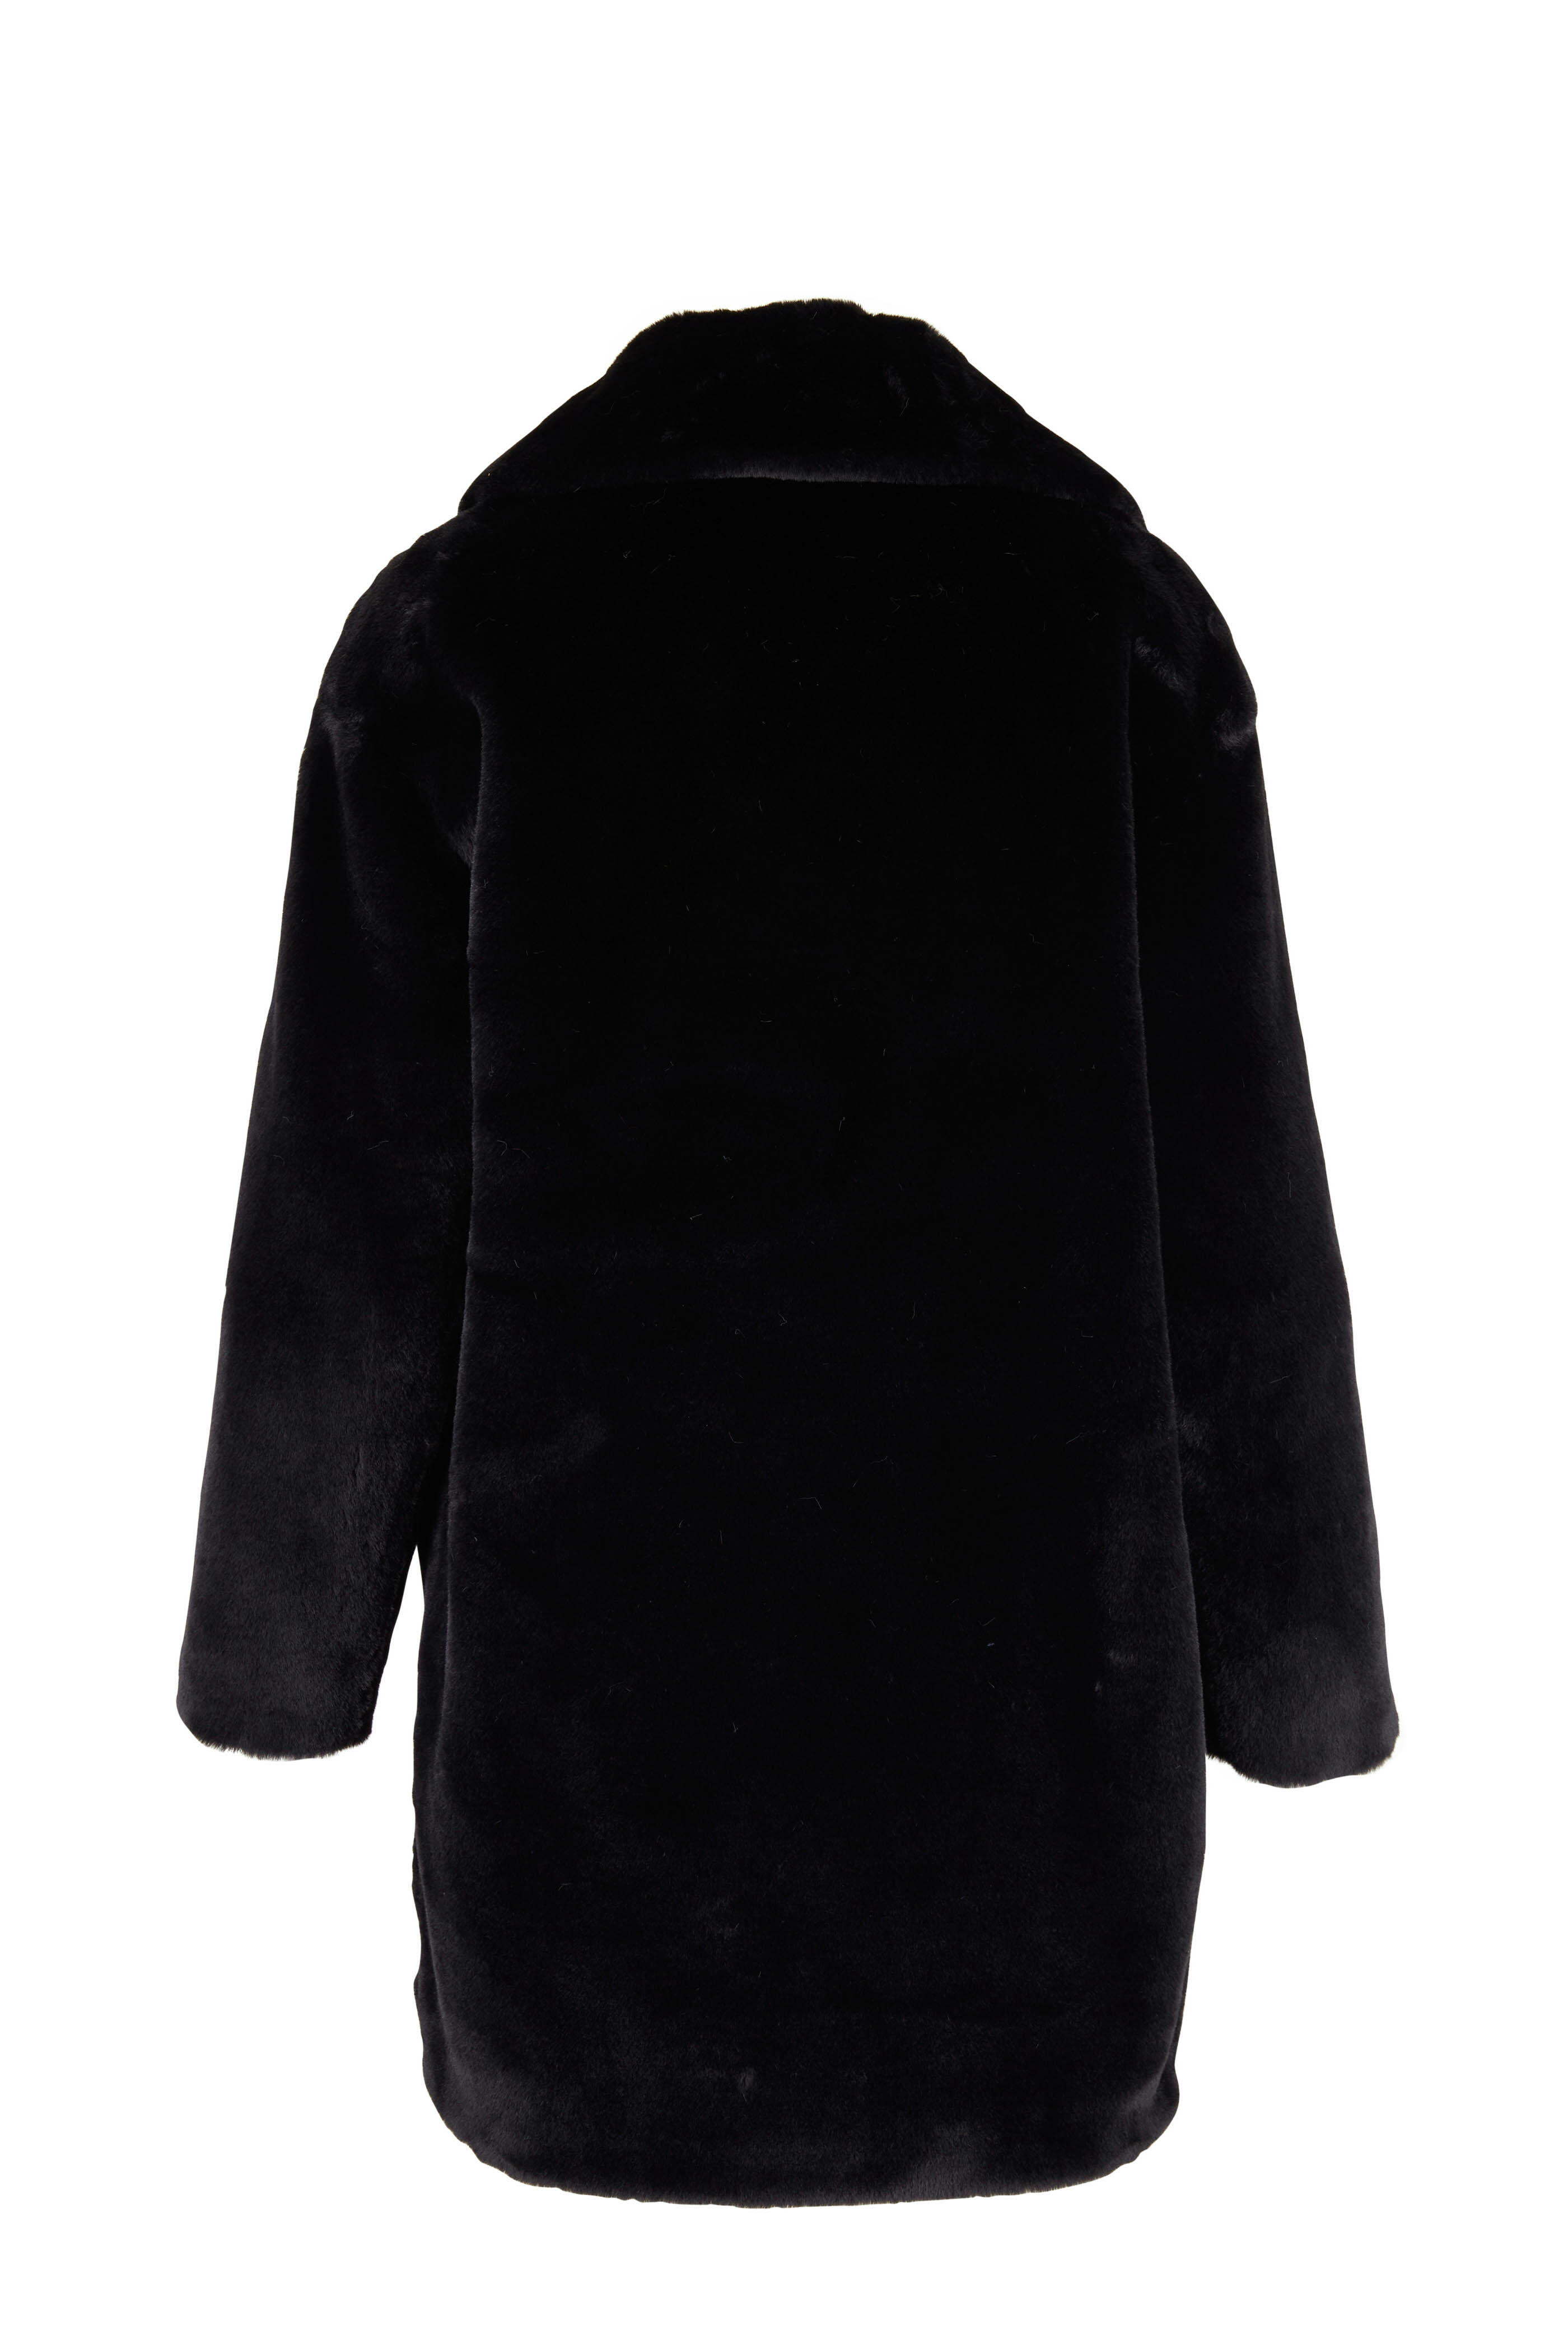 Herno - Black Faux Fur Mid-Length Coat | Mitchell Stores